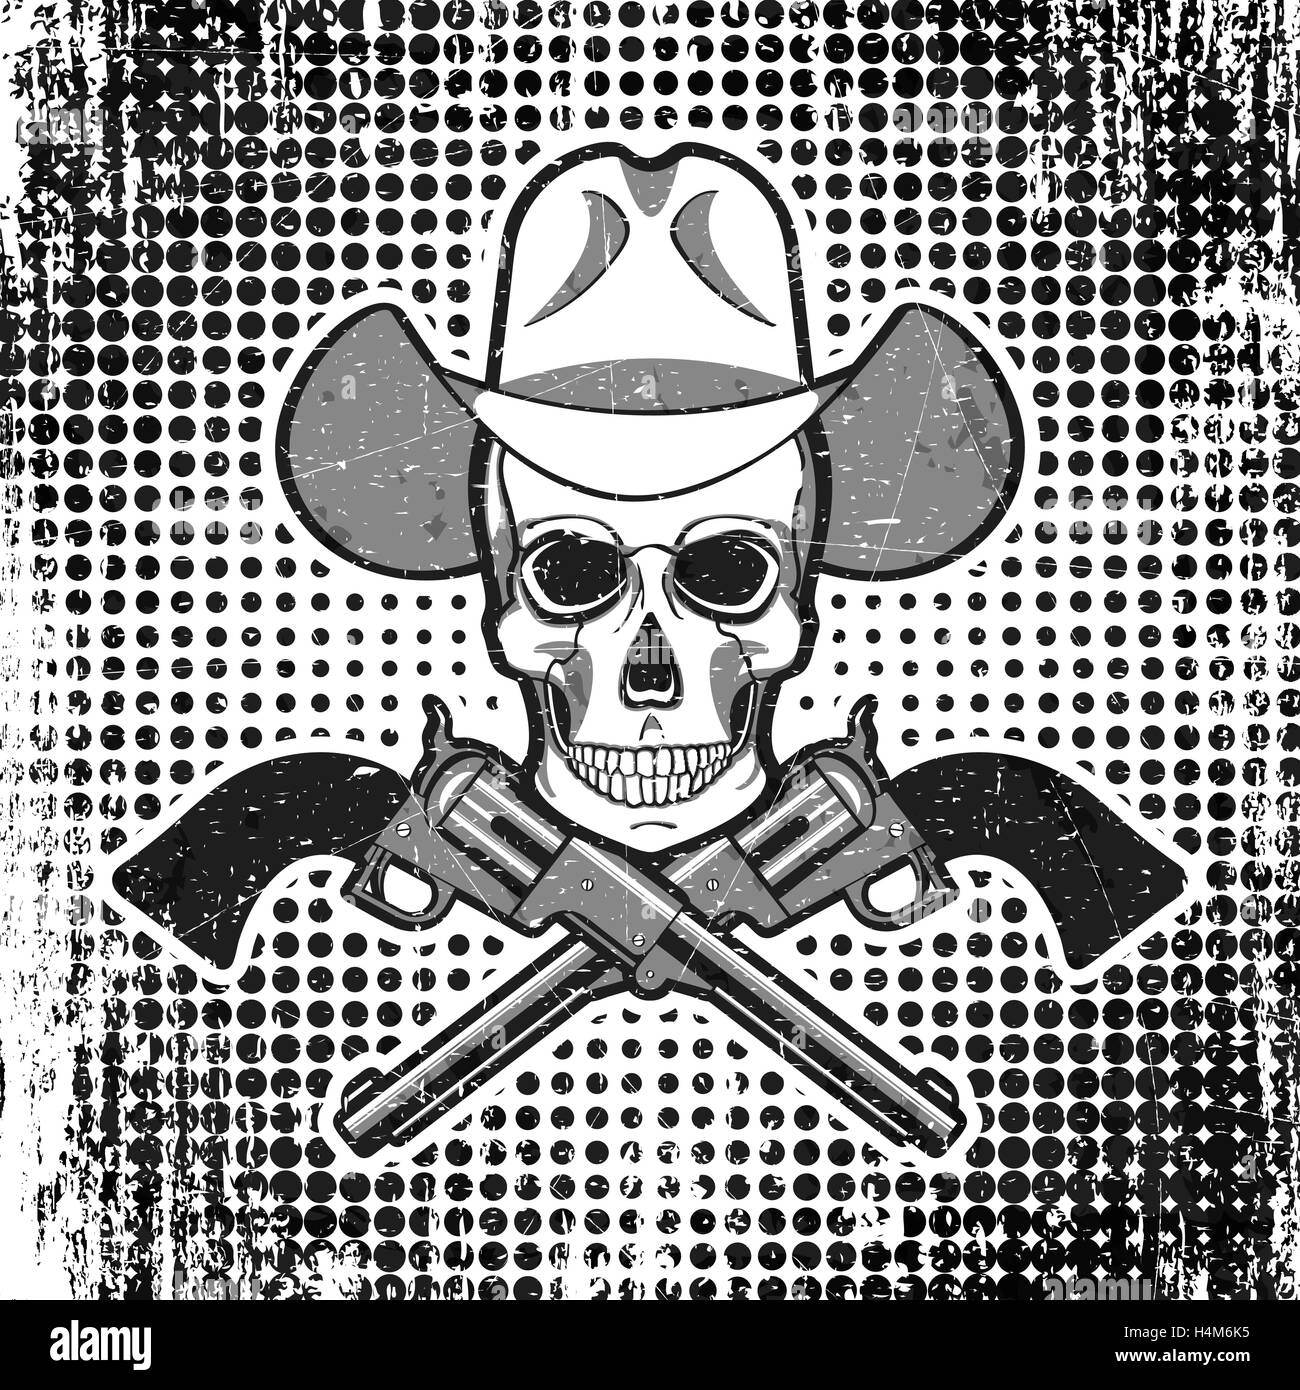 Skull in cowboy hat with revolvers, grunge vintage polka dot background. Stock Vector